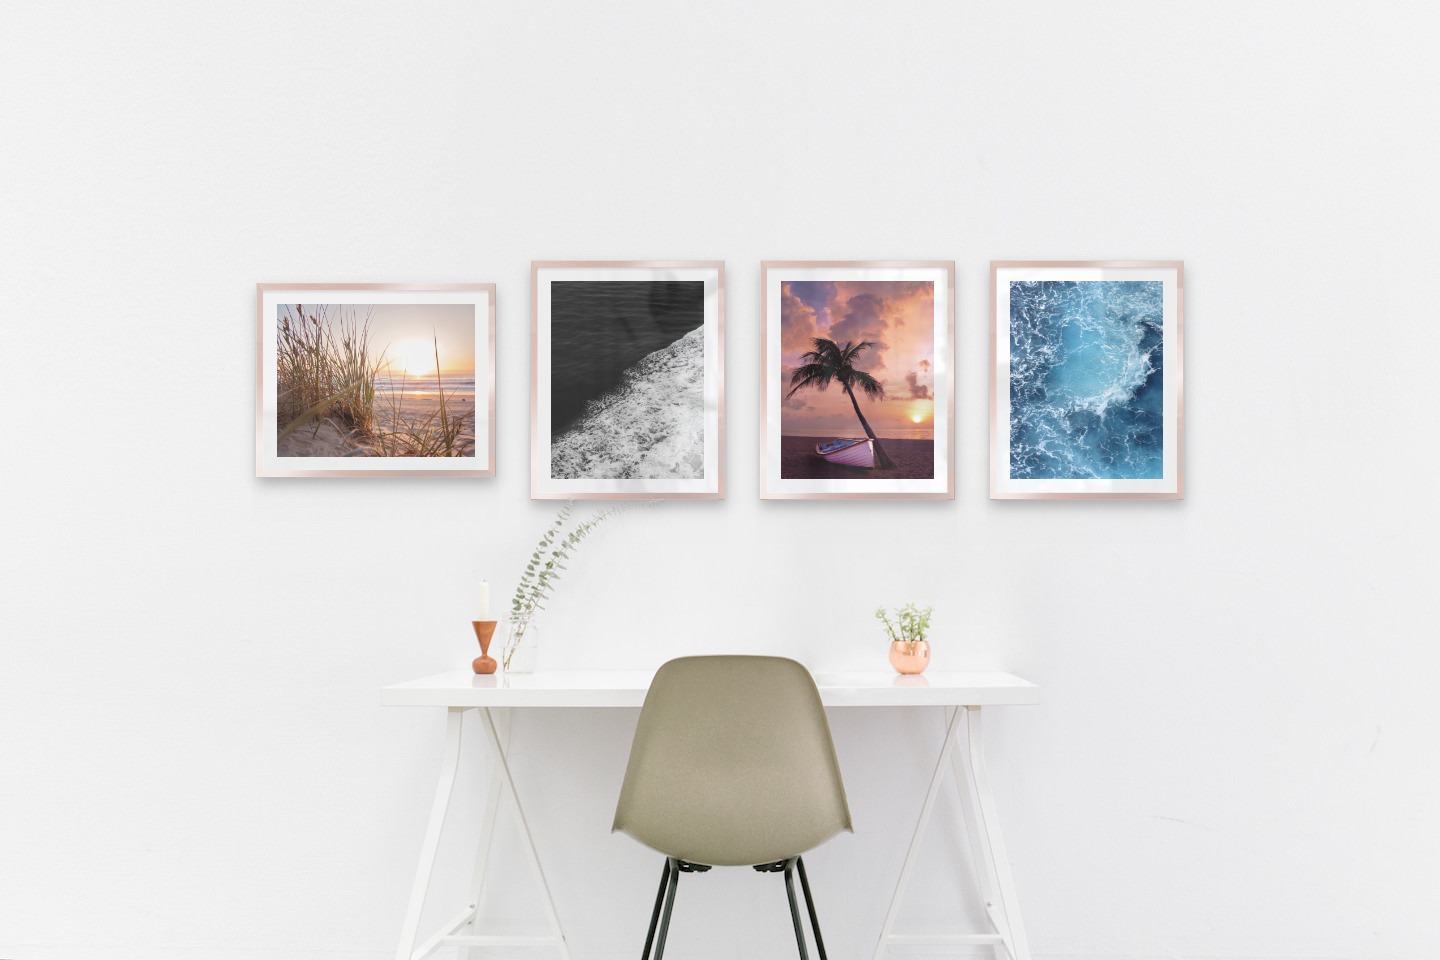 Gallery wall with picture frames in copper in sizes 40x50 with prints "Straw on the beach", "Swell from waves", "Palm on the beach" and "Sea from above"